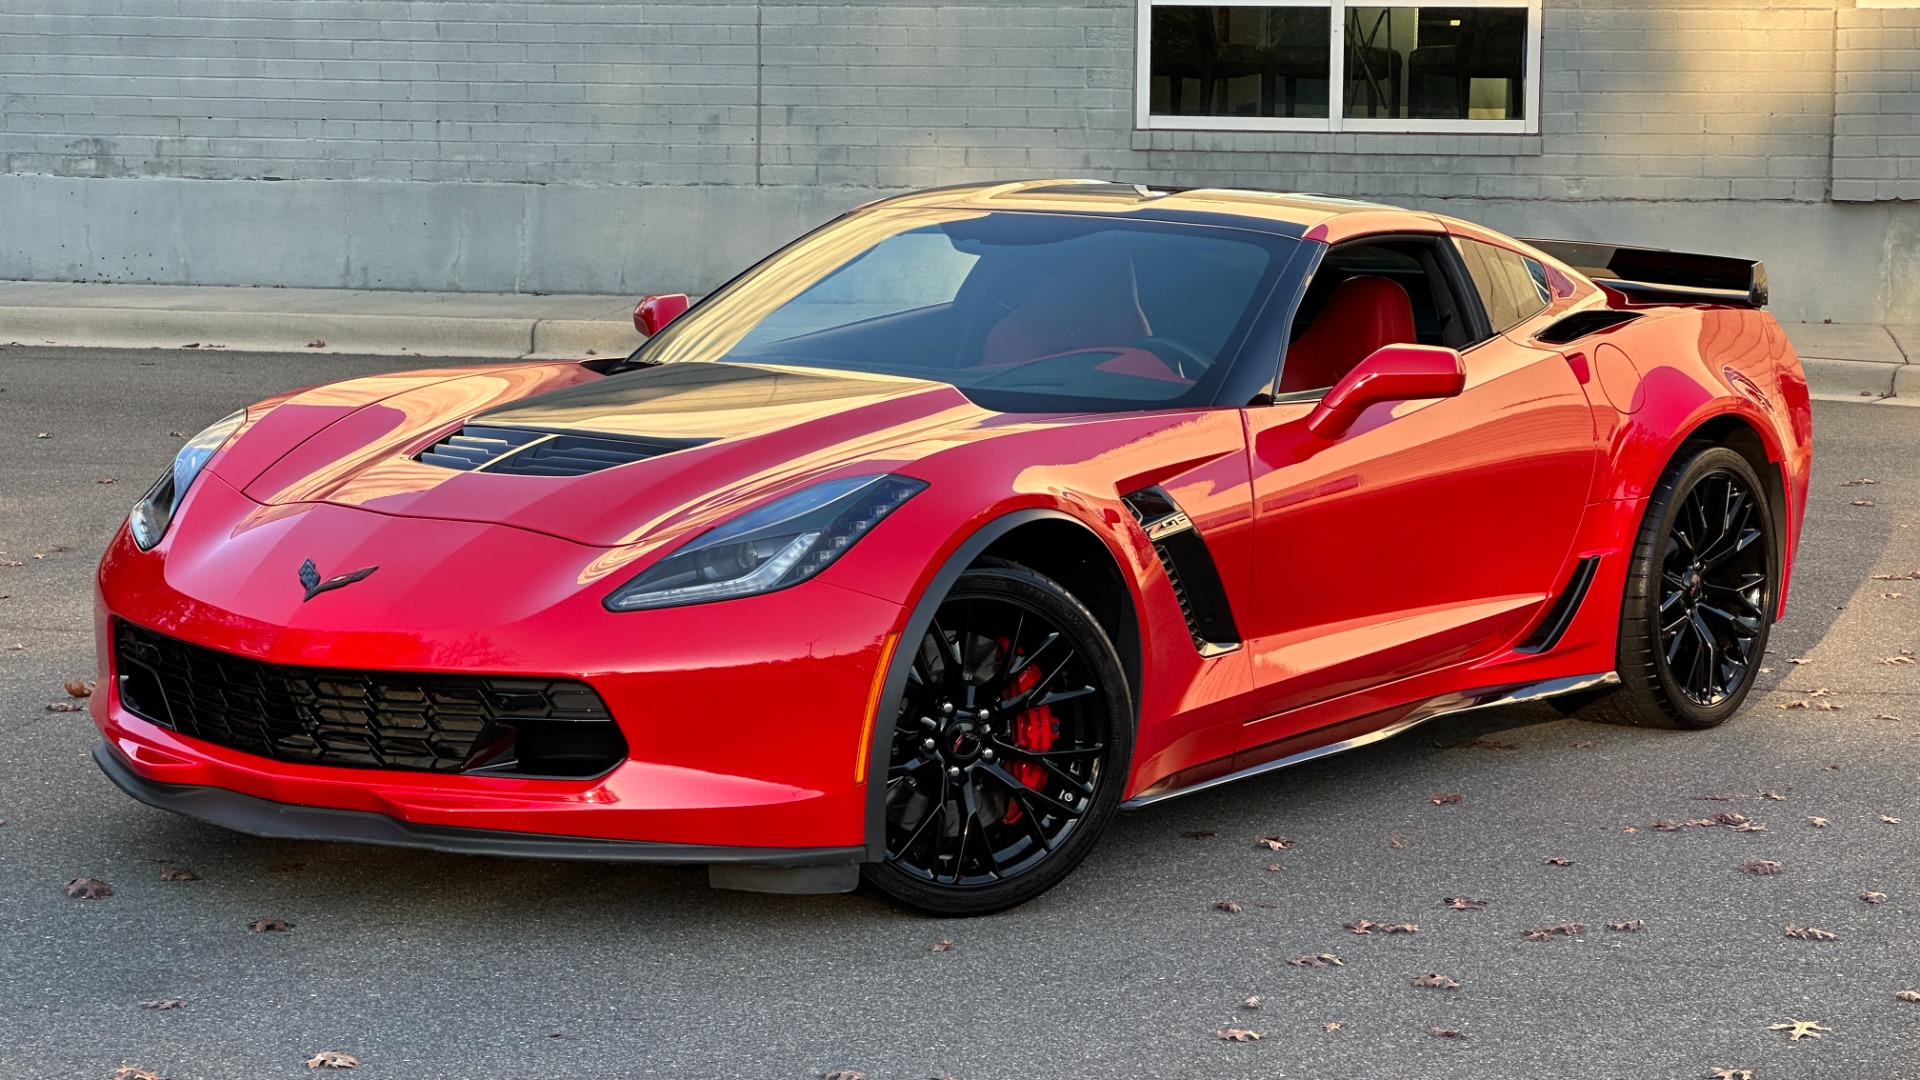 Used 2016 Chevrolet CORVETTE Z06 3LZ / 6.2L SUPERCHARGED 650HP / NAV / BOSE / REARVIEW for sale Sold at Formula Imports in Charlotte NC 28227 3